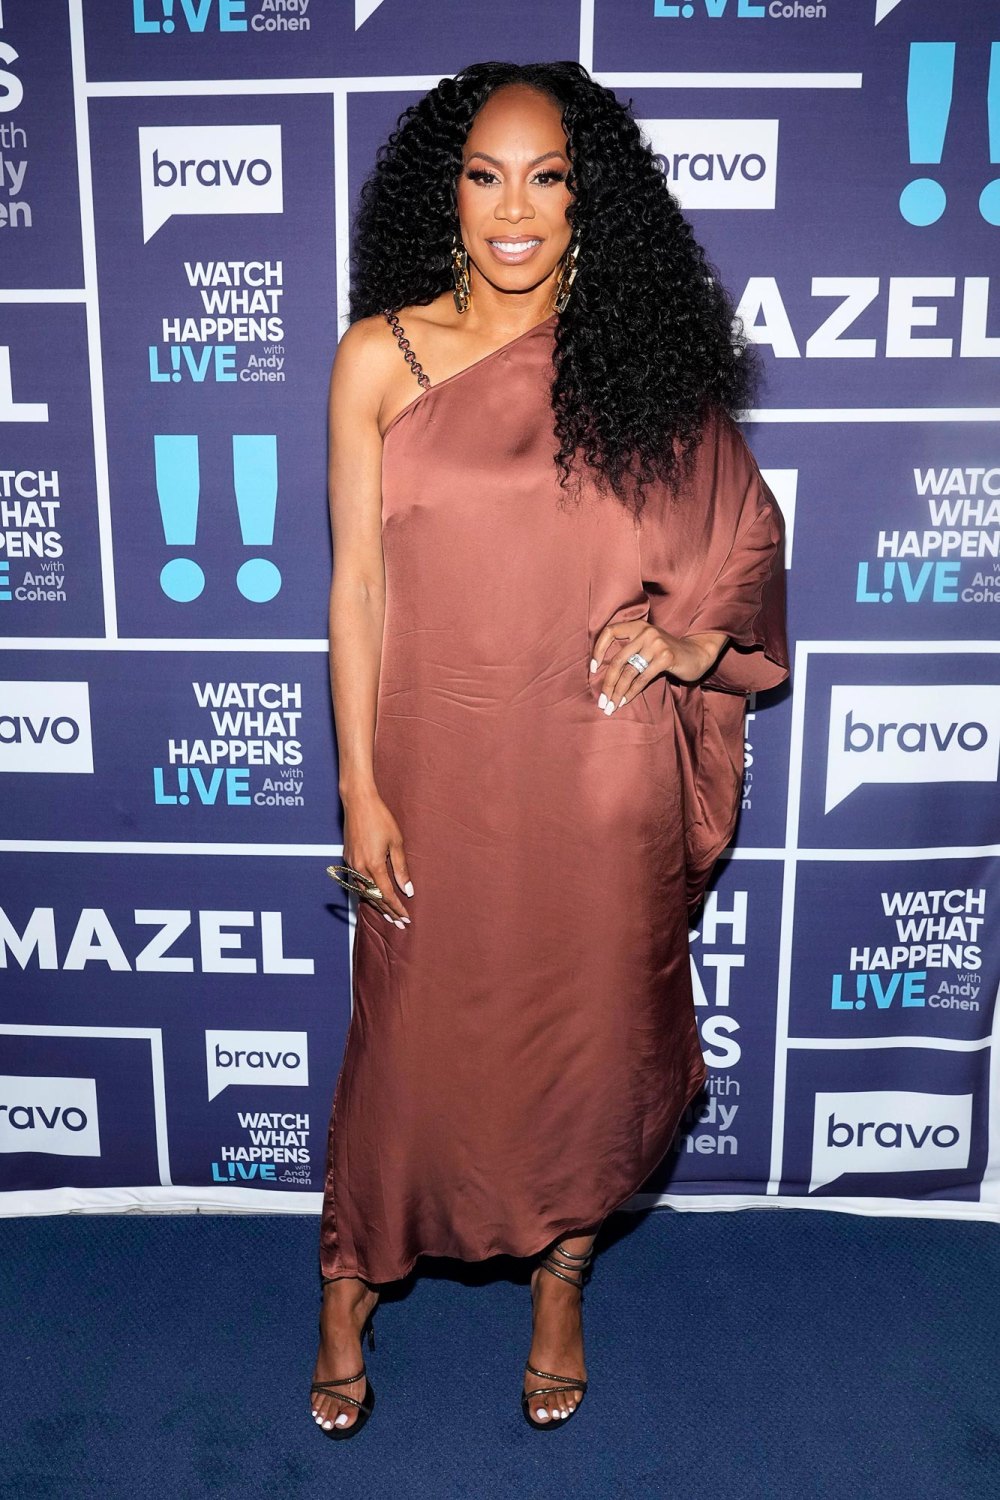 The Real Housewives of Atlanta Star Sanya Richards-Ross Is Pregnant With Baby No. 2-234 Watch What Happens Live With Andy Cohen - Season 20